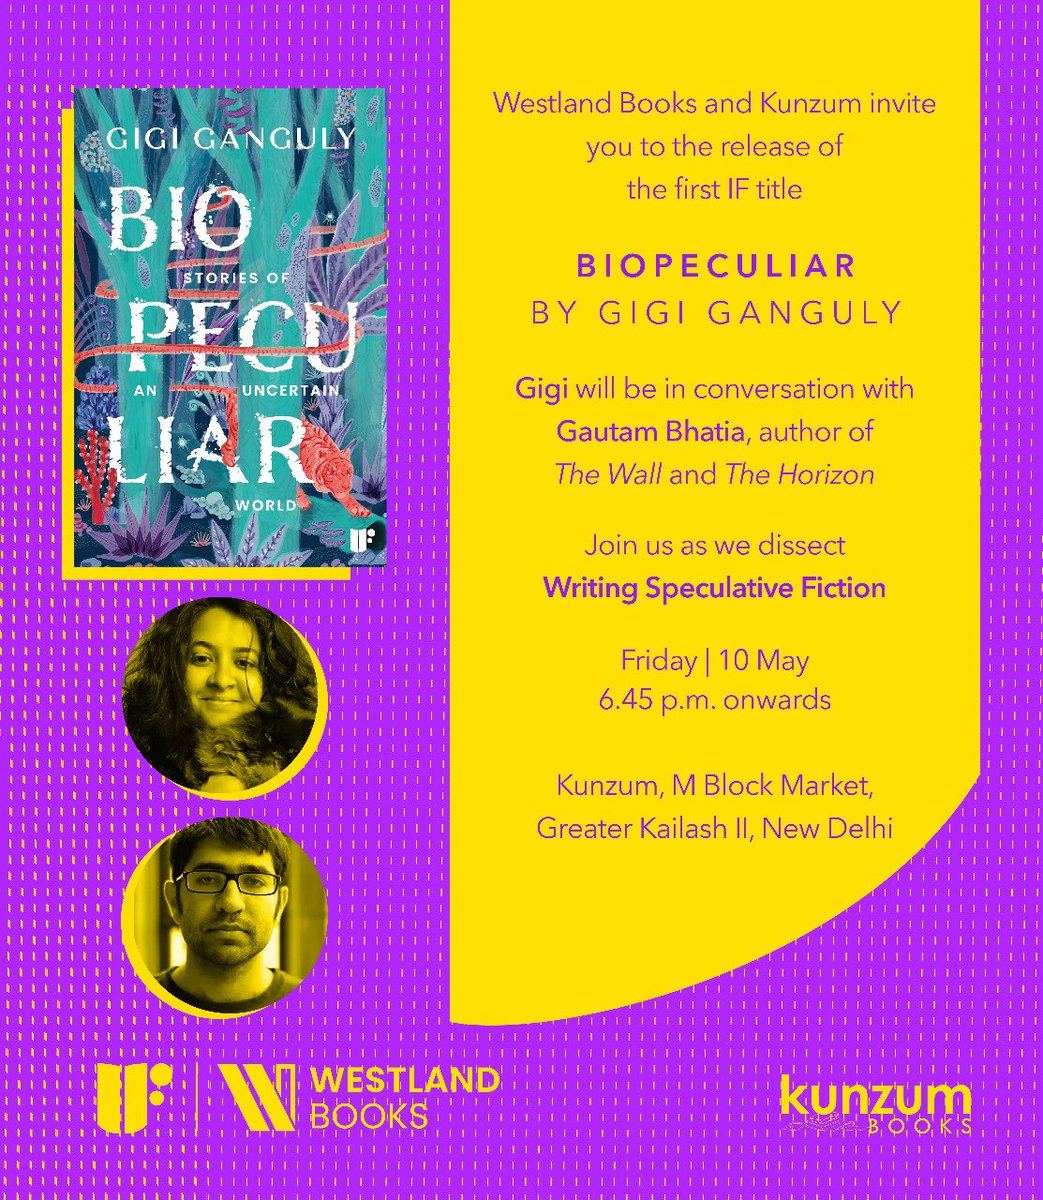 #Delhi Mark your calendars! We are launching our first #IF title, @gigiganguly’s #Biopeculiar with @gautambhatia88 at @kunzum. Join us as we discuss the futuristic and exciting world of #SpeculativeFiction. RSVP: shivanikaul@pratilipi.com